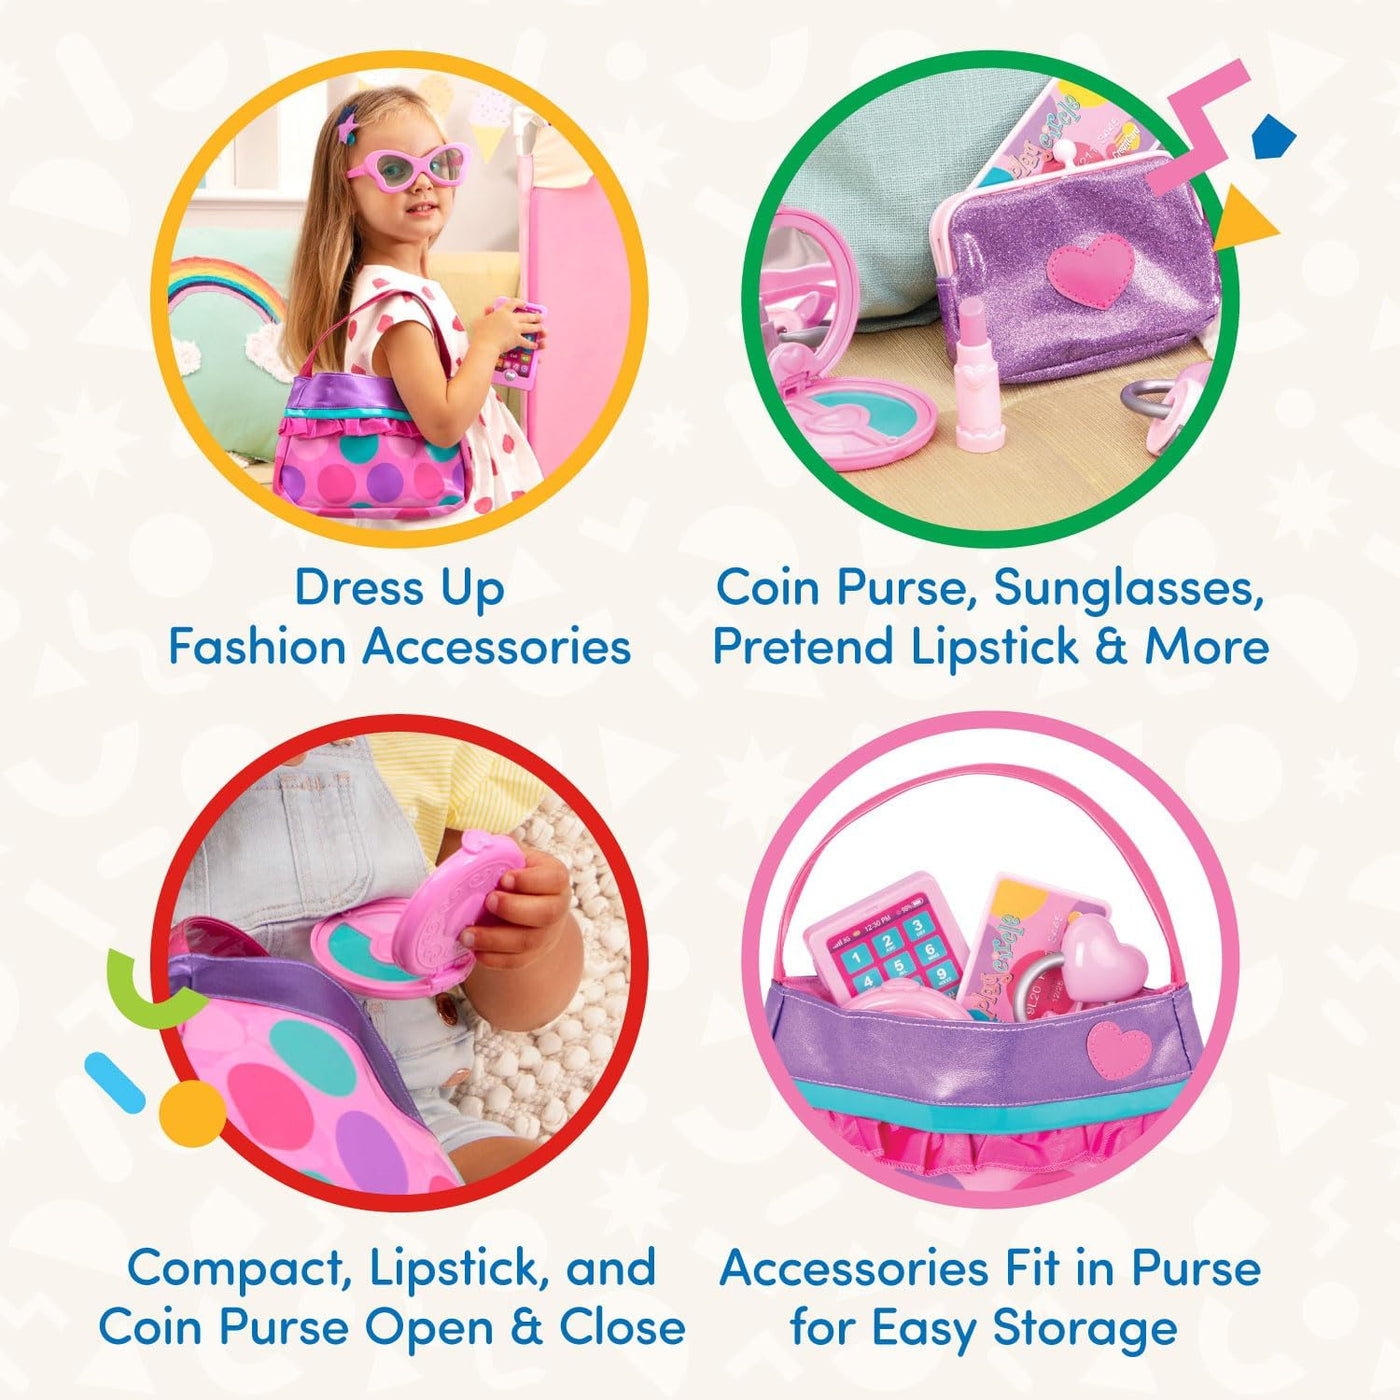 Princess Purse Style Set – Pretend Play Multicolor Handbag and Fashion Accessories – Toy Makeup, Keys, Lipstick, Credit Card, Phone, and More